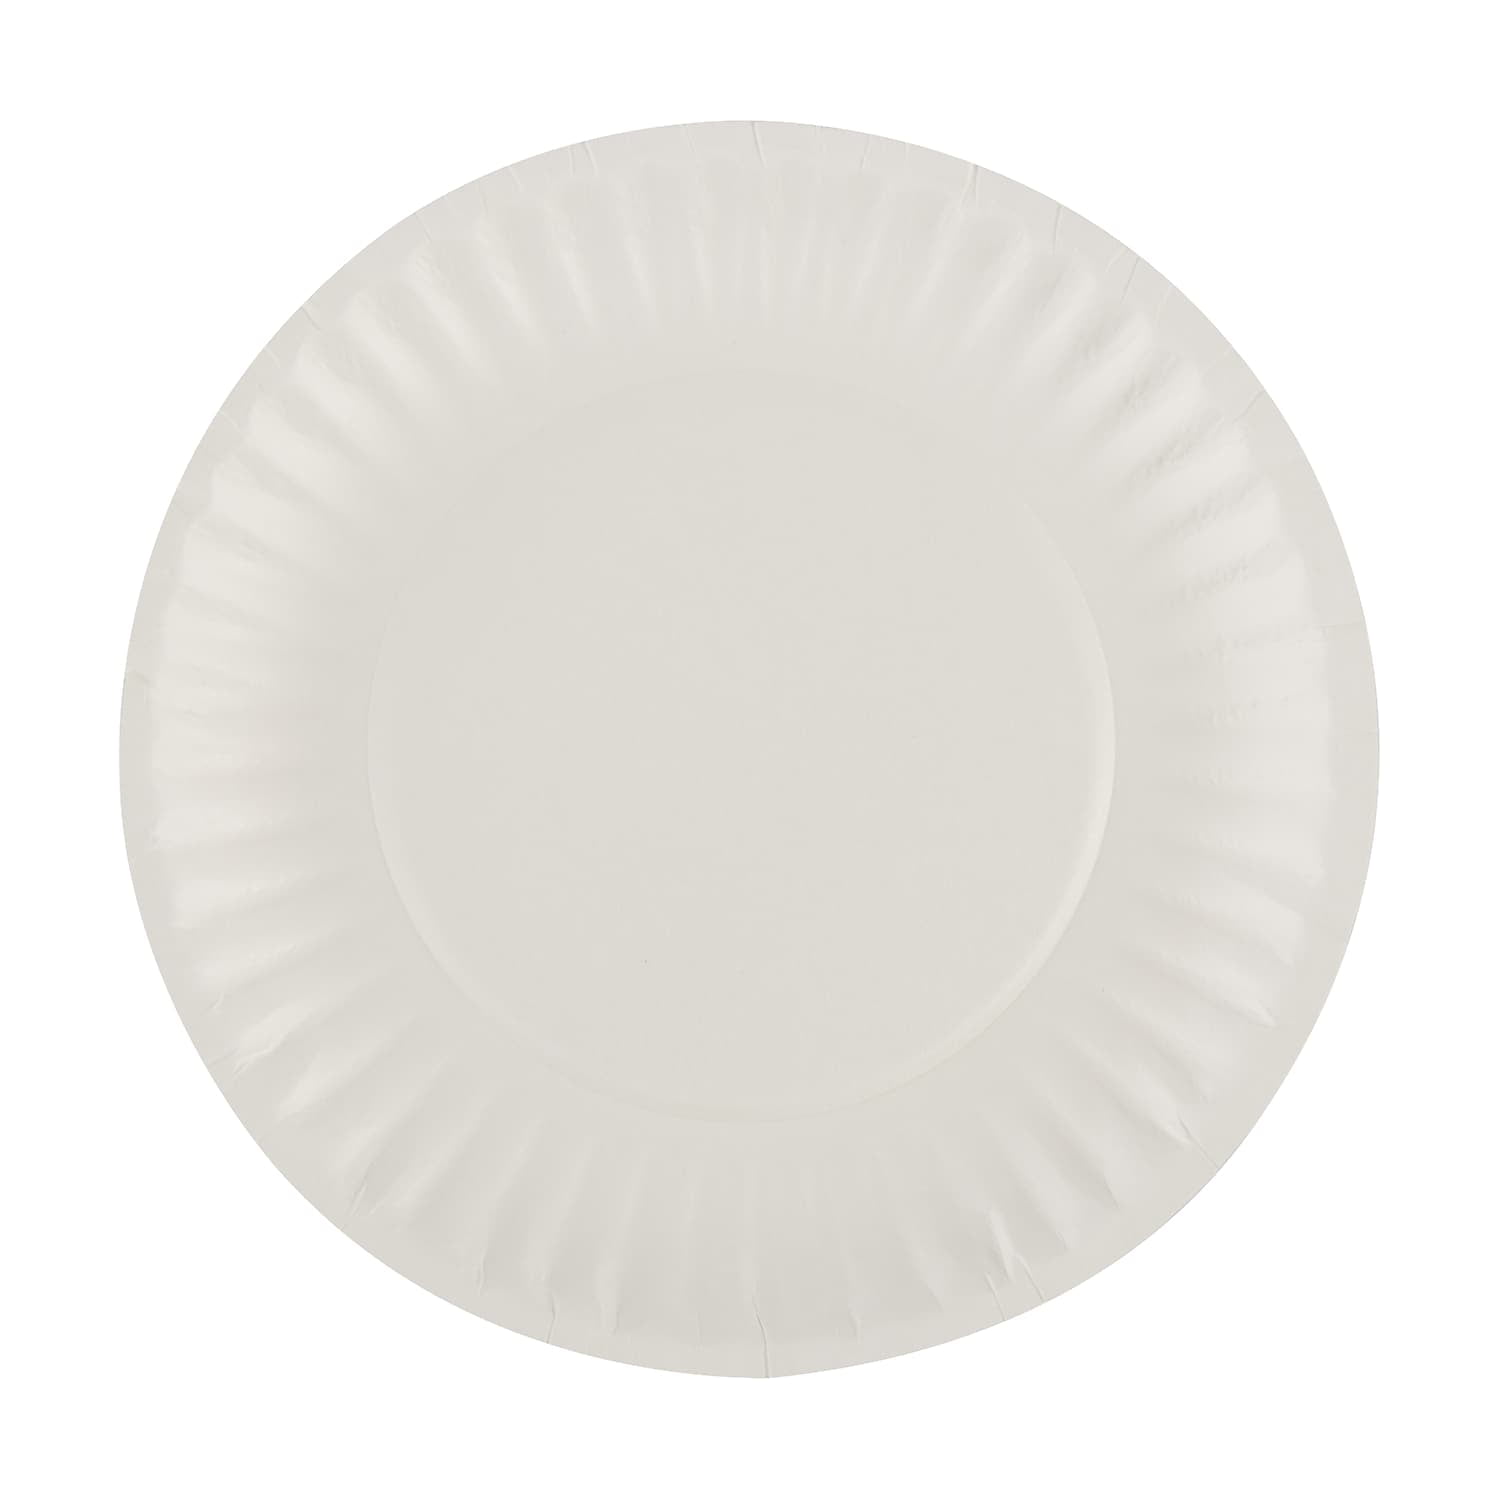 Nicole Home Collection 6 | White| Pack of 1000 Paper Plates, 6-Inch